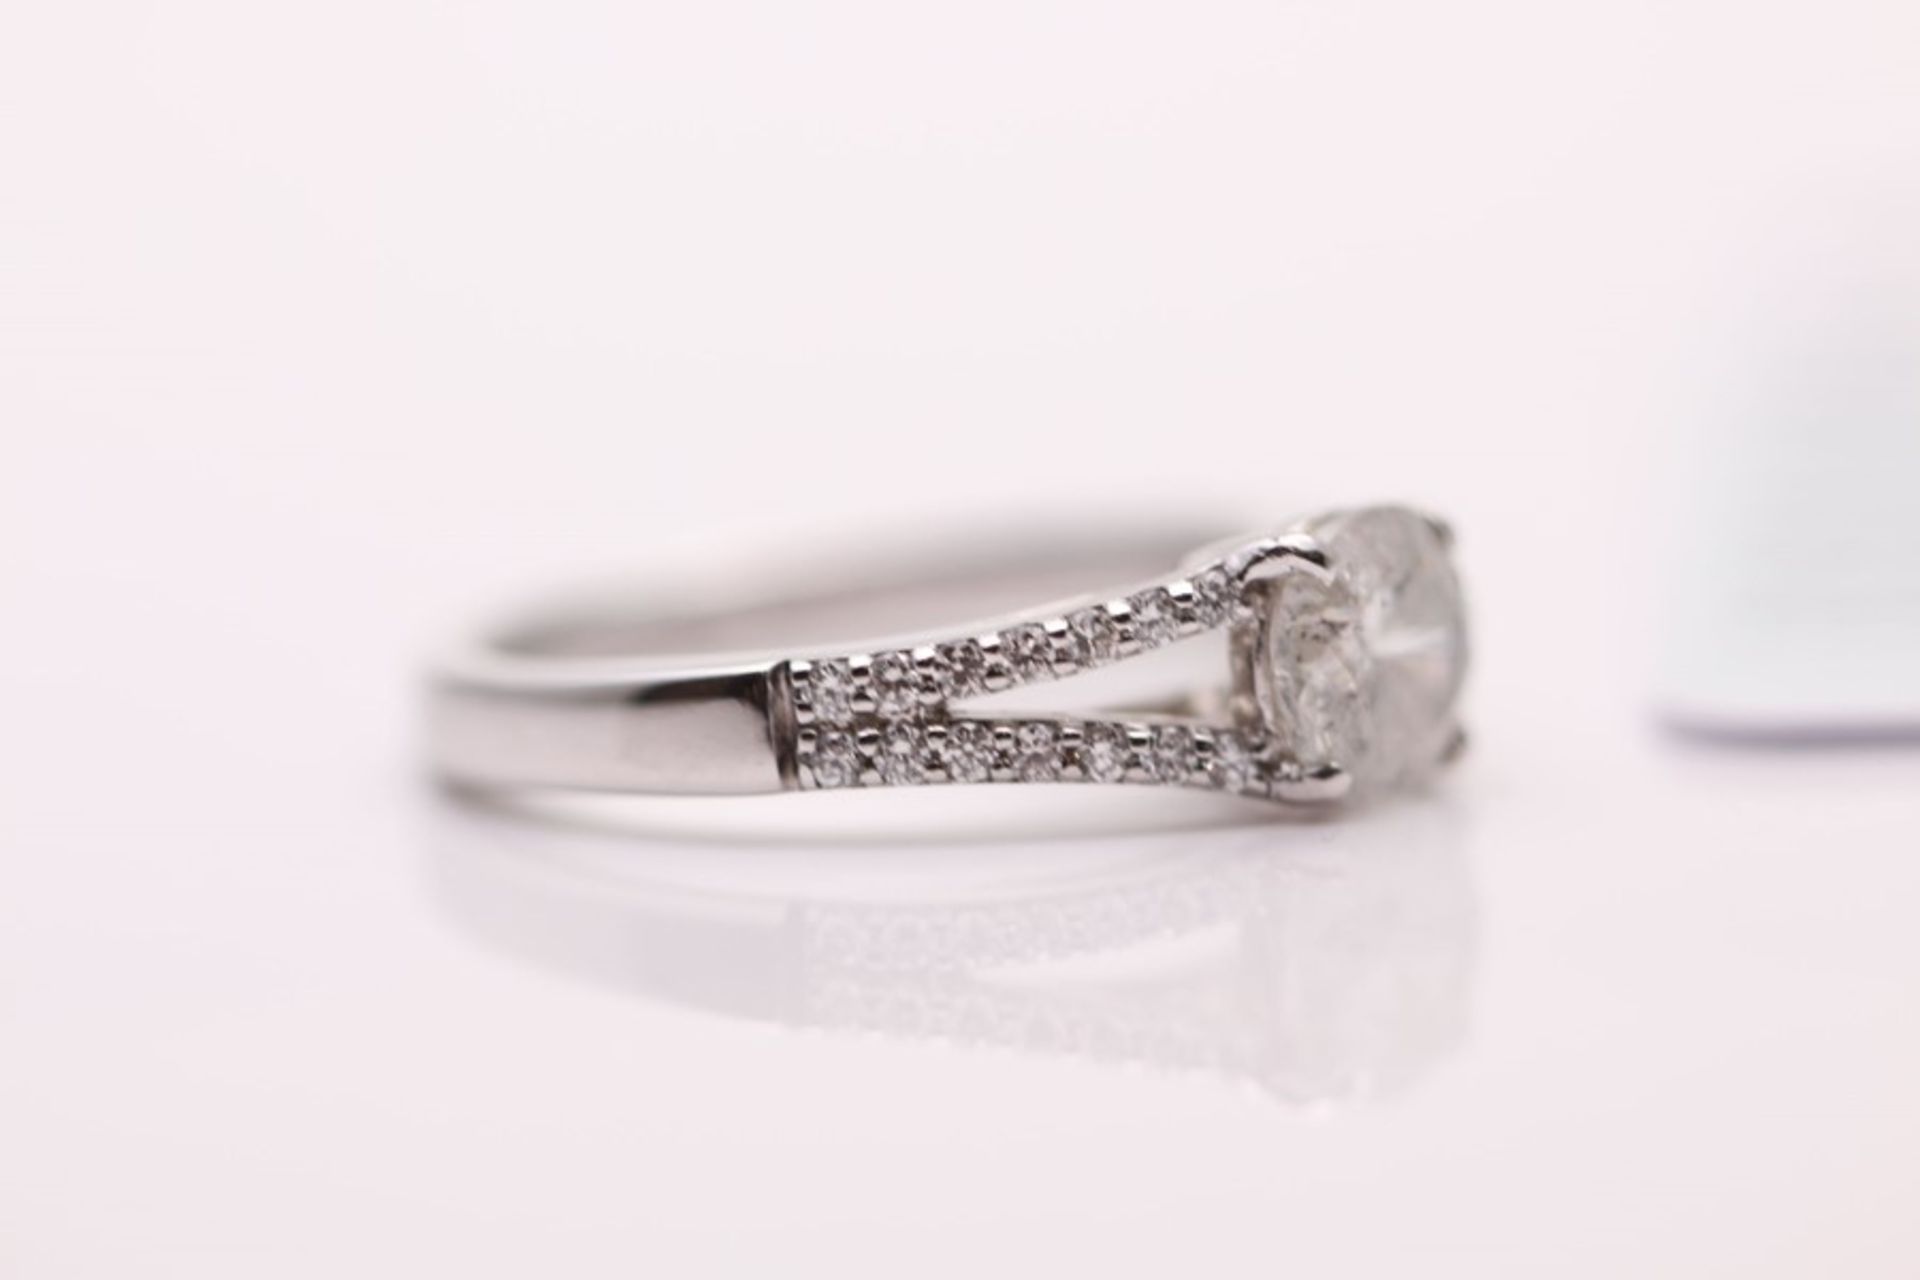 18CT WHITE GOLD LADIES DIAMOND SOLITAIRE RING - Image 2 of 4